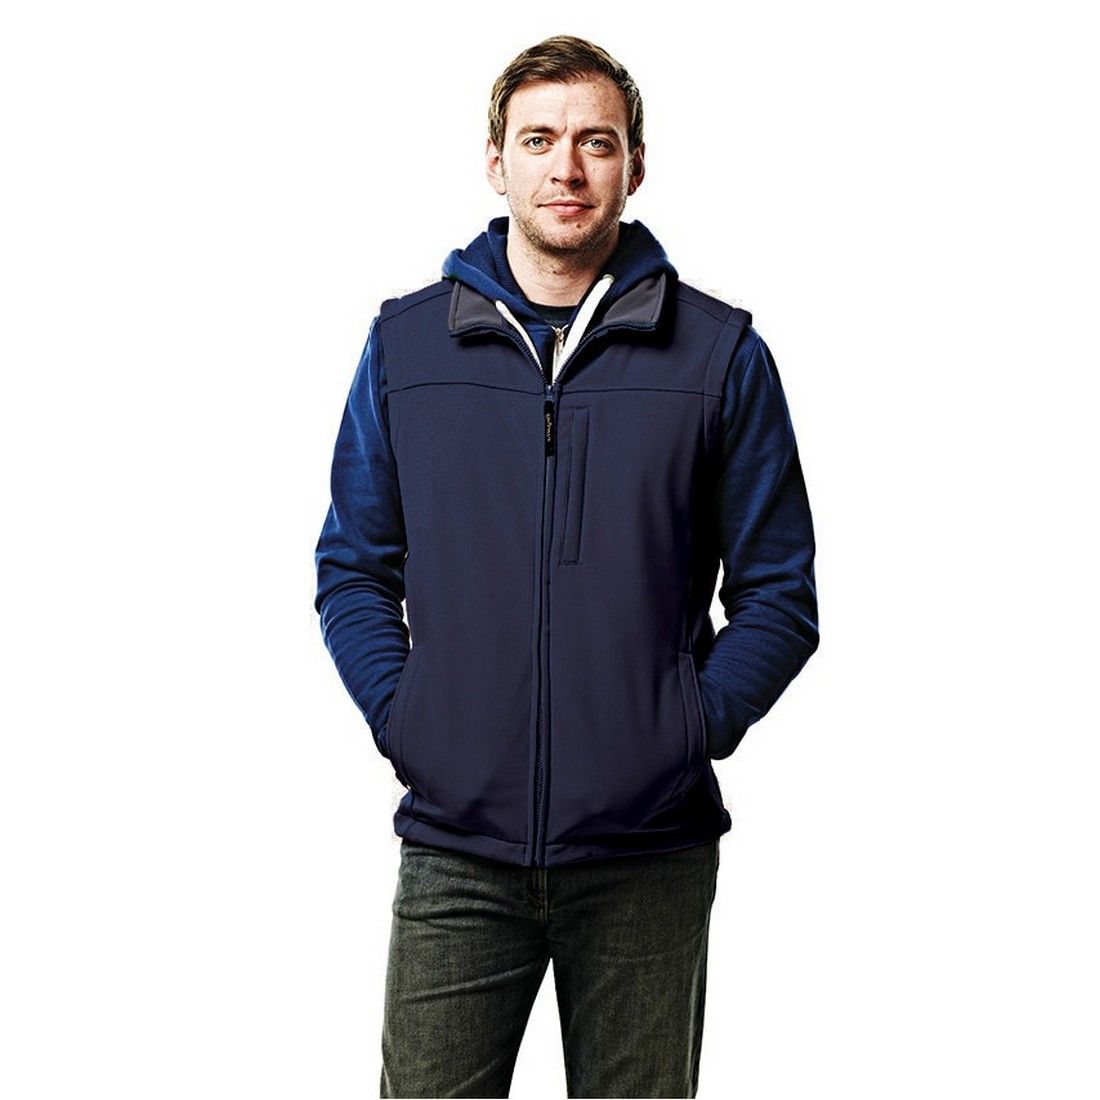 Warm backed woven stretch Softshell fabric with durable water repellent finish. Wind resistant with quick drying fabric and super soft handle. 2 zipped lower and 1 chest pocket. Adjustable shockcord hem. Lightweight and easy to wear. Size Chest (to fit) S - 38 M - 40ï¿½ L - 42 XL - 44 2XL - 47 3XL - 50. Fabric Woven Stretch Softshell. 96% polyester/4% elastane outer.